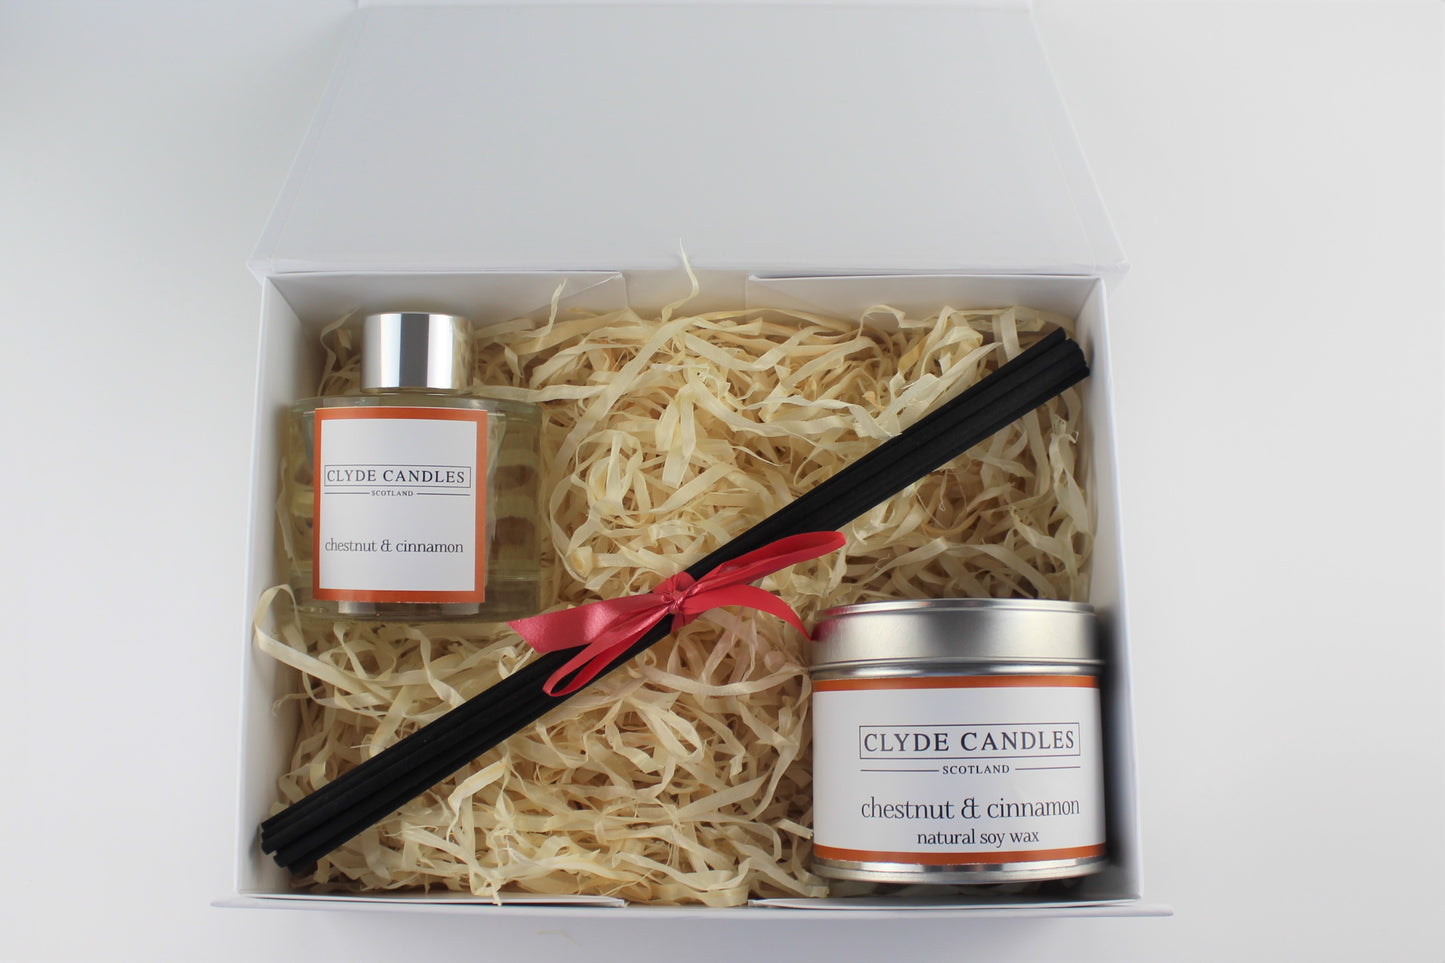 Chestnut & Cinnamon Diffuser & Candle Gift Box Set - Scottish Natural Soy Candle